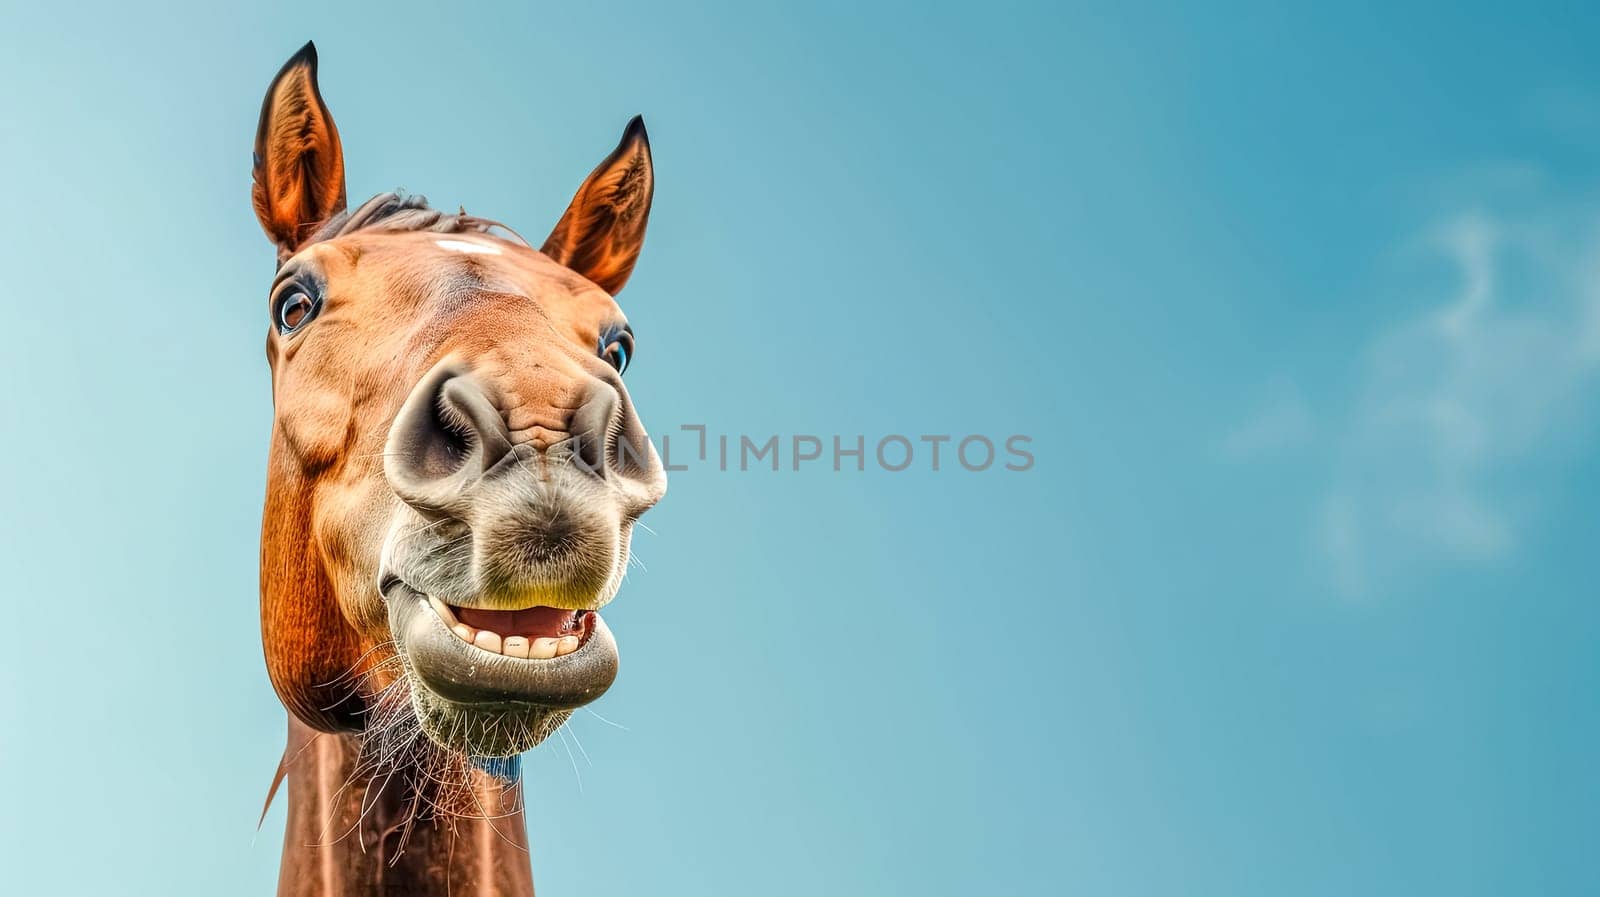 Amused horse with funny facial expression against blue sky by Edophoto